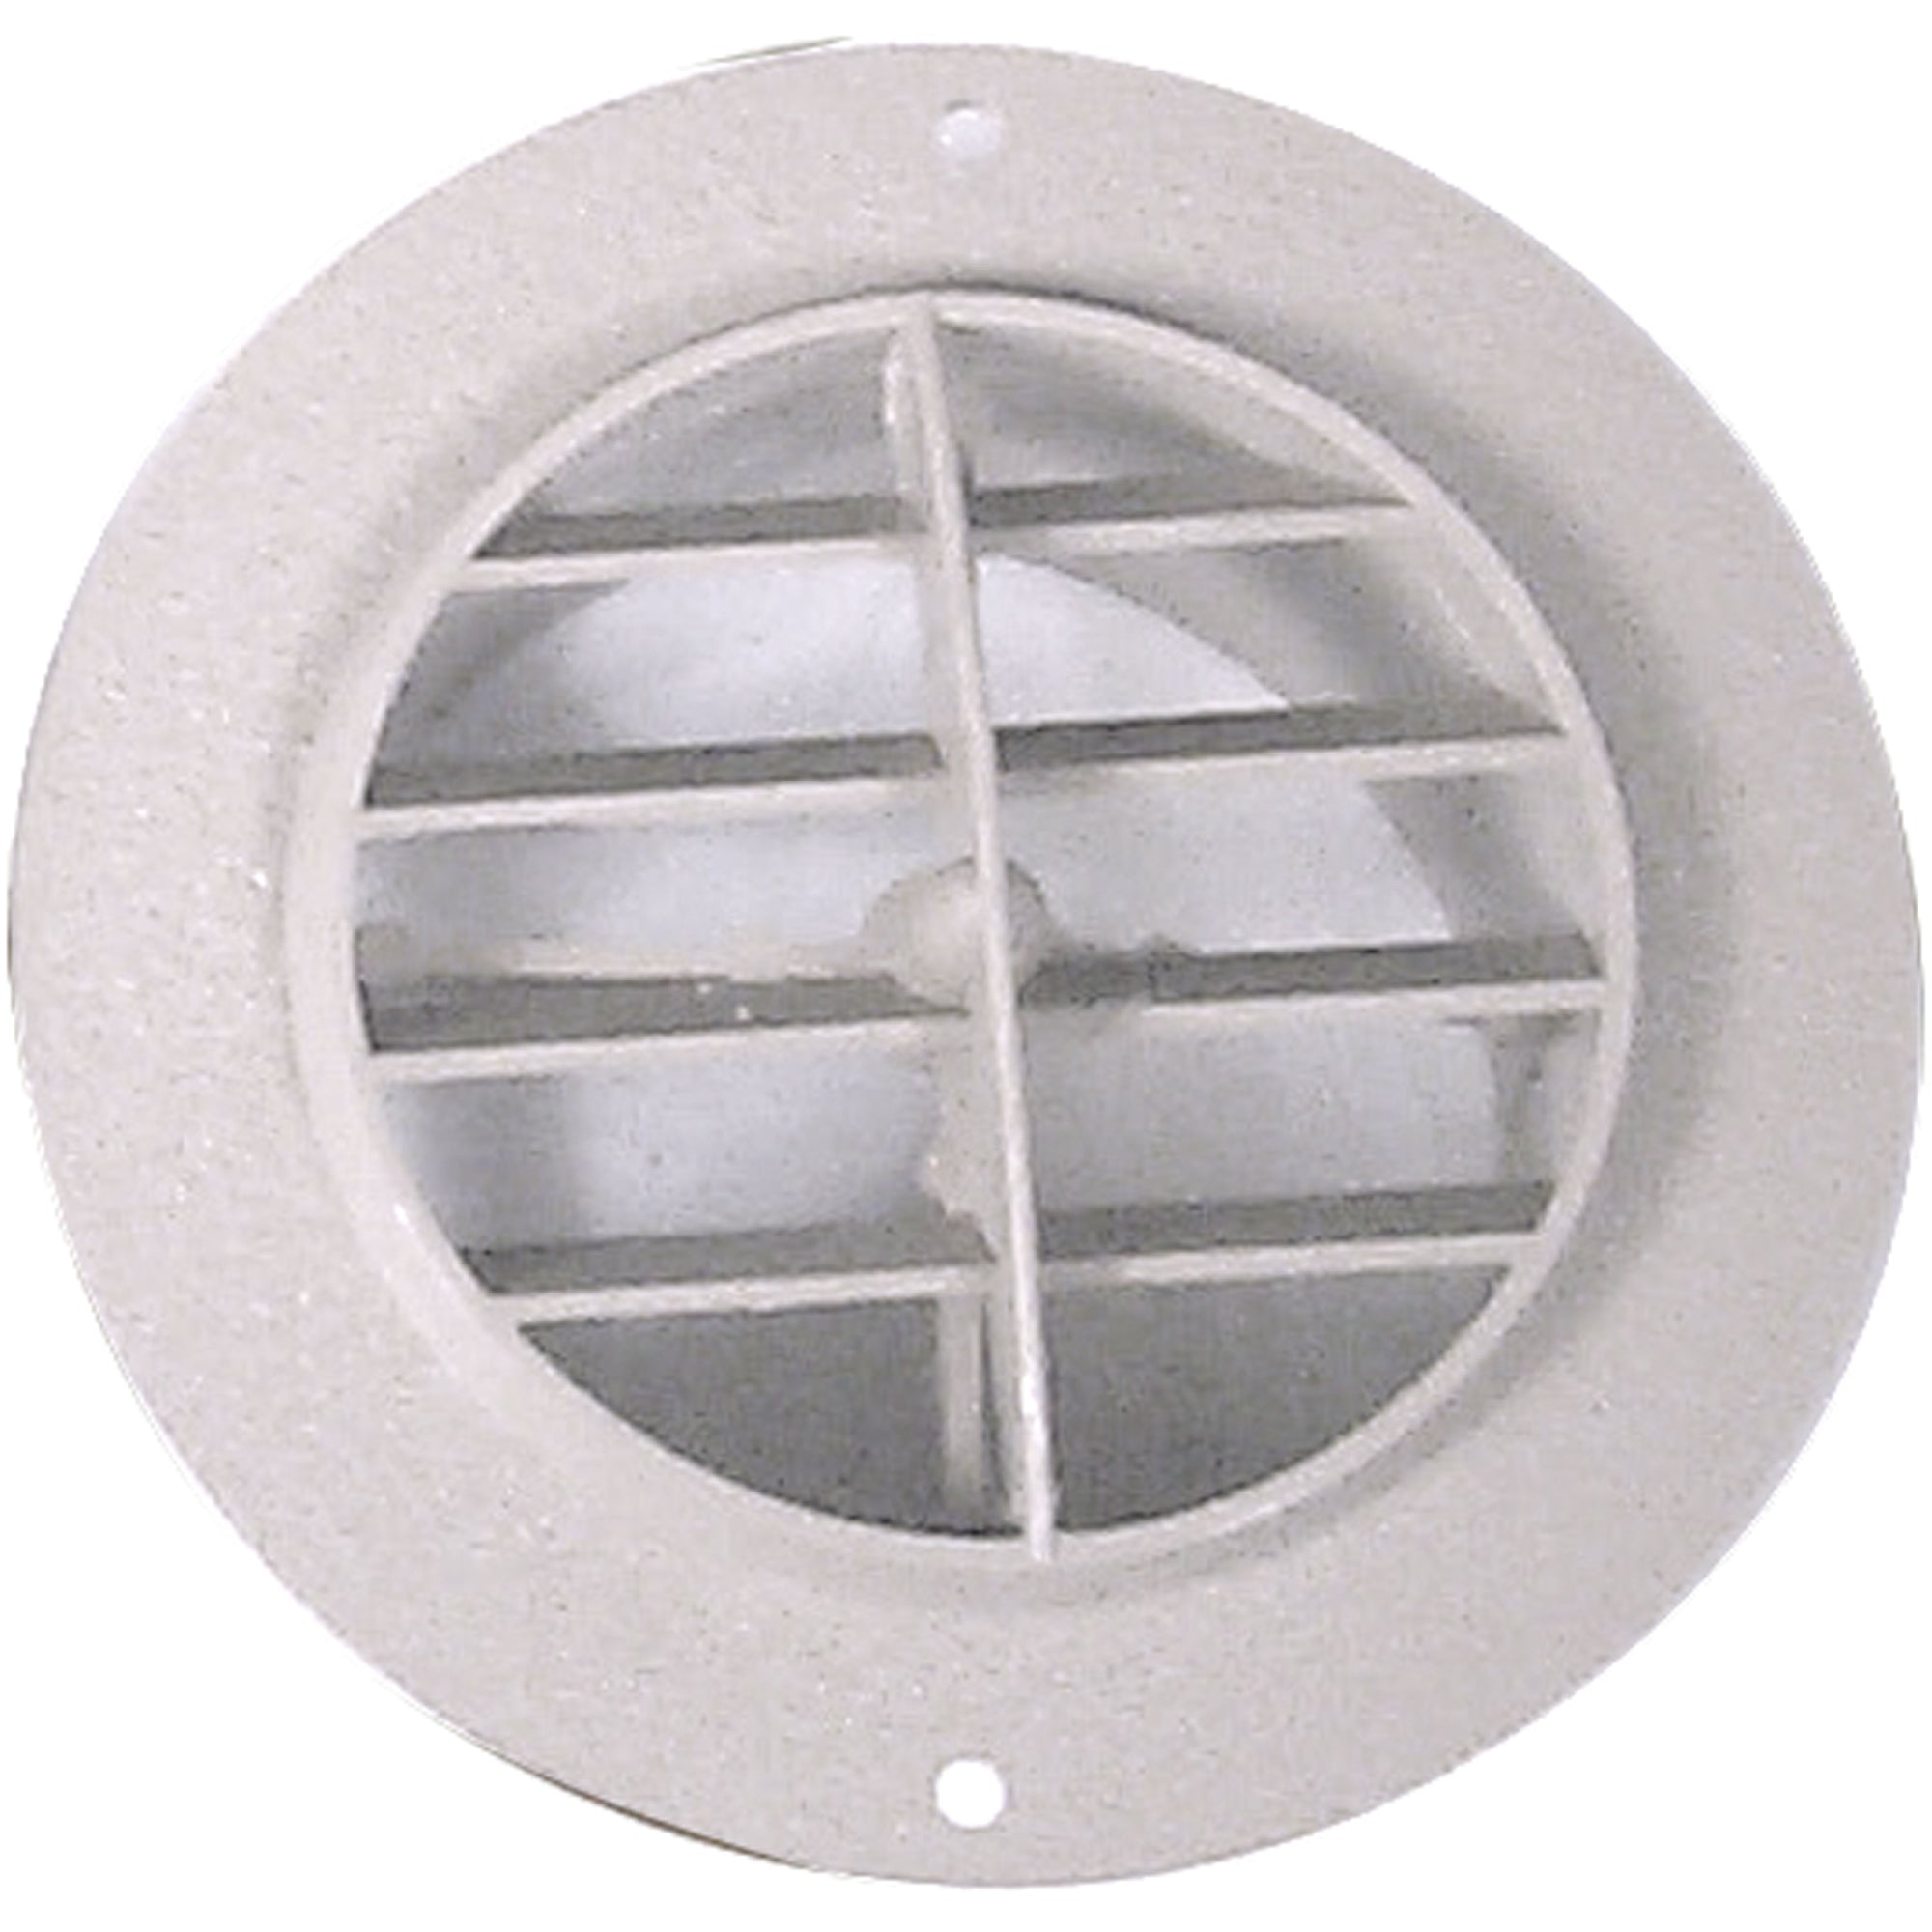 D&W 3840WH Rotaire Heat Outlet Vent - 4", White